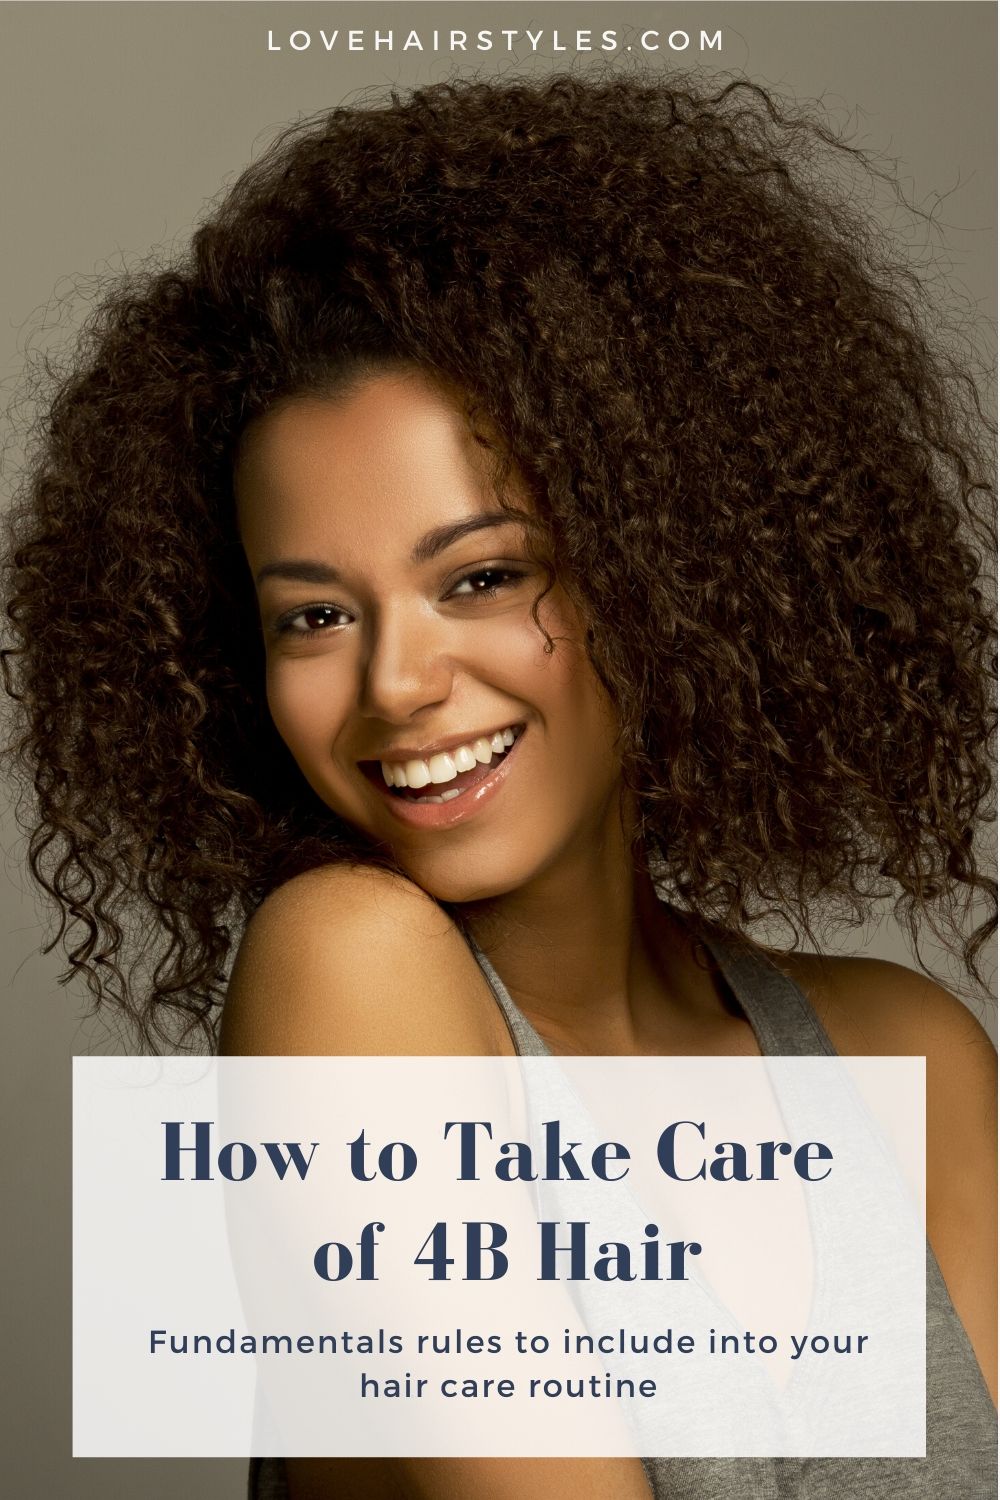 How to Take Care of 4B Hair